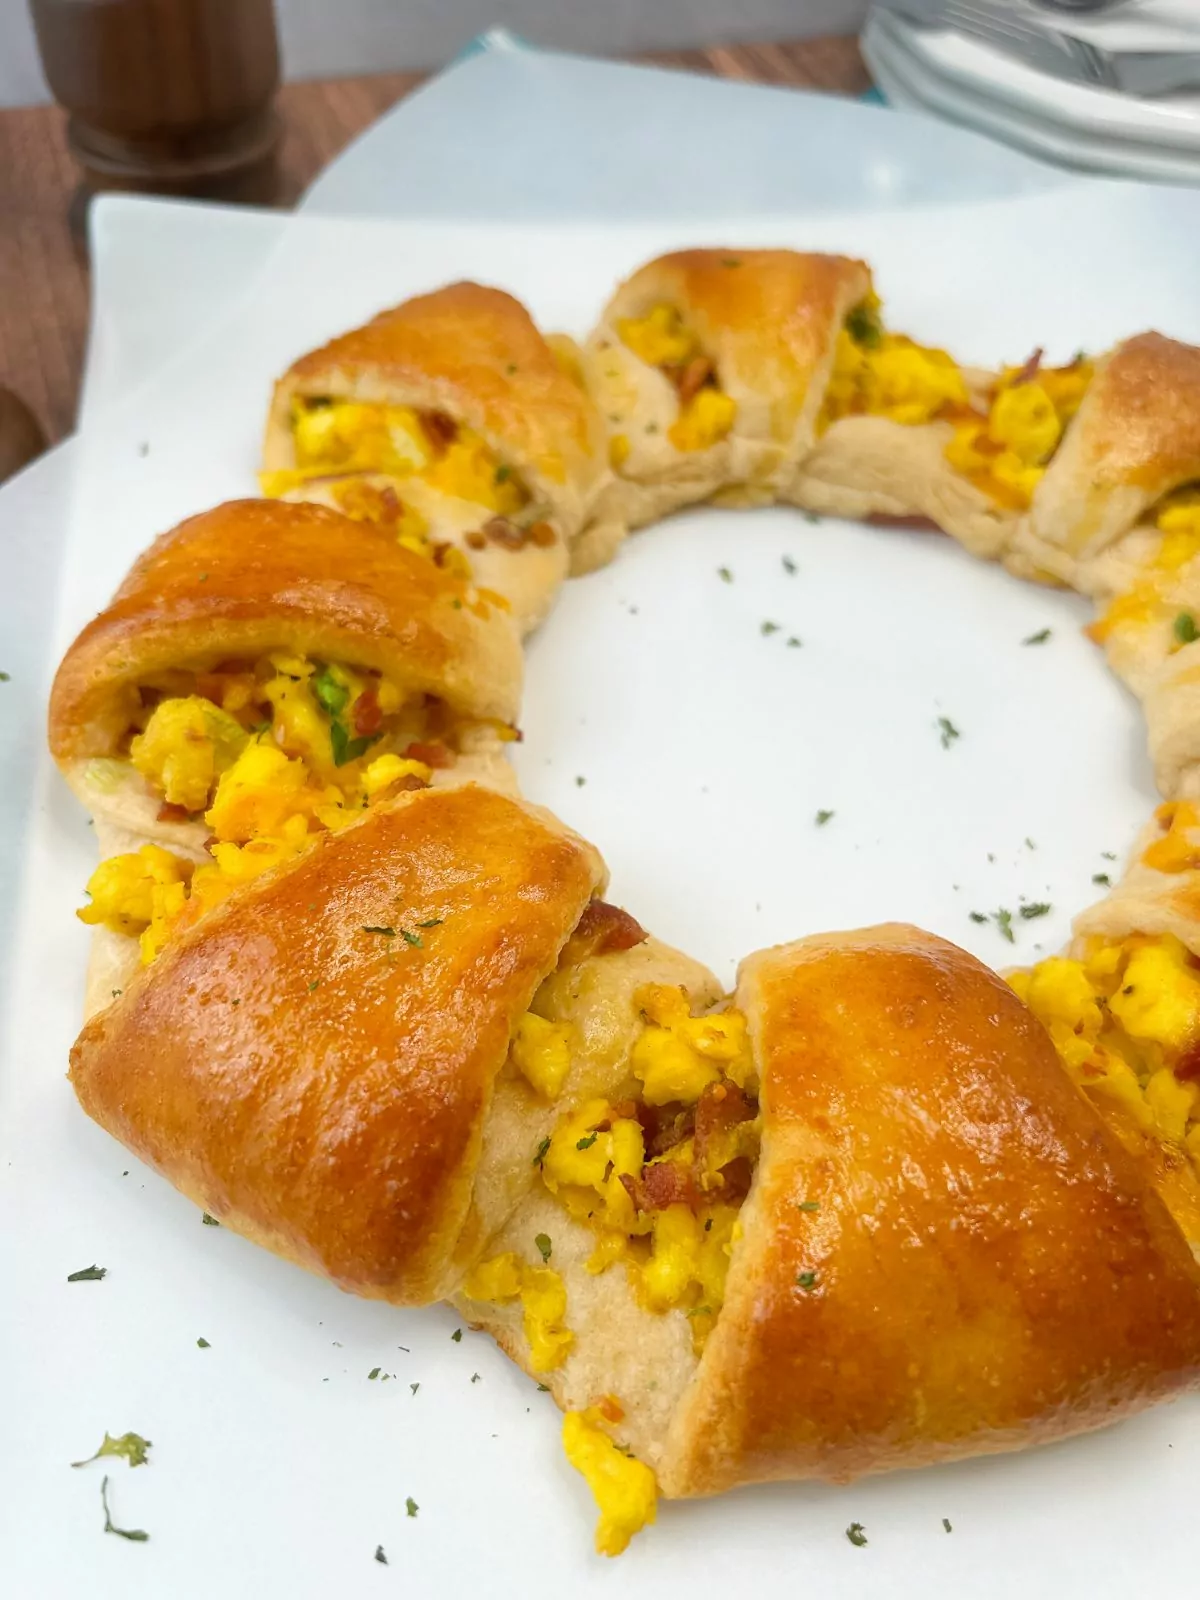 baked crescent roll wreath with scrambled eggs and bacon.